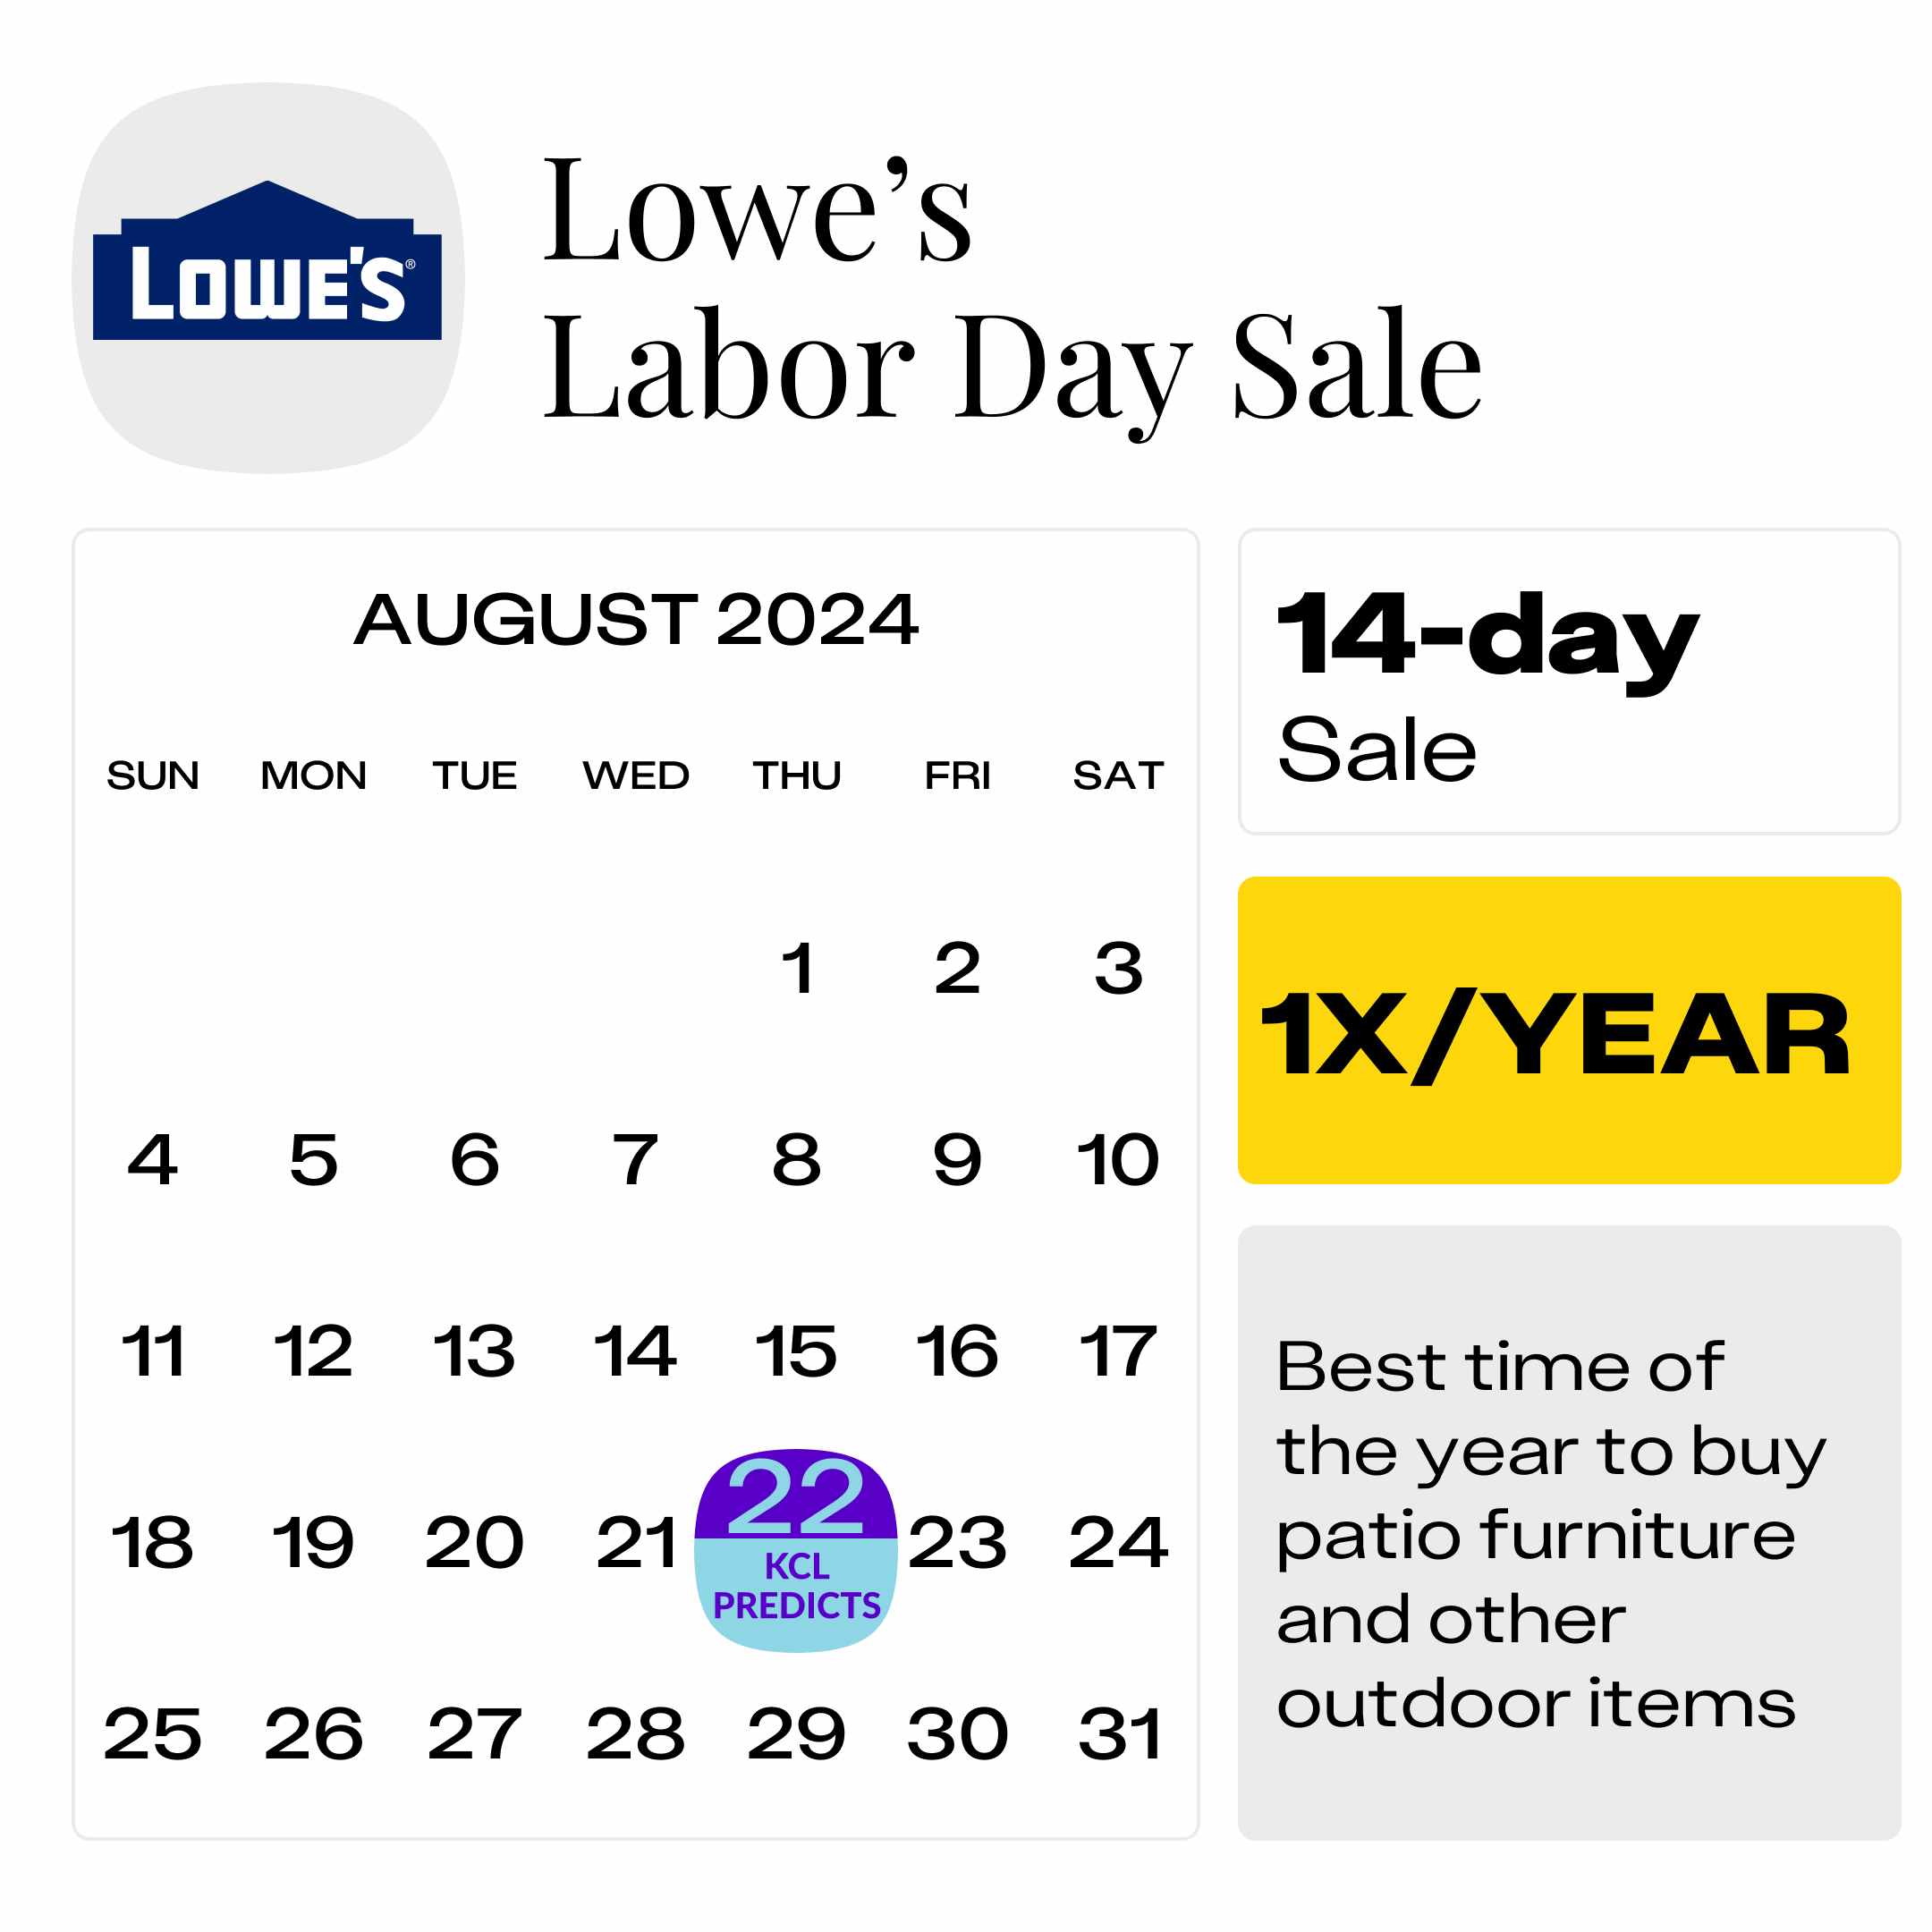 Lowes-Labor-Day